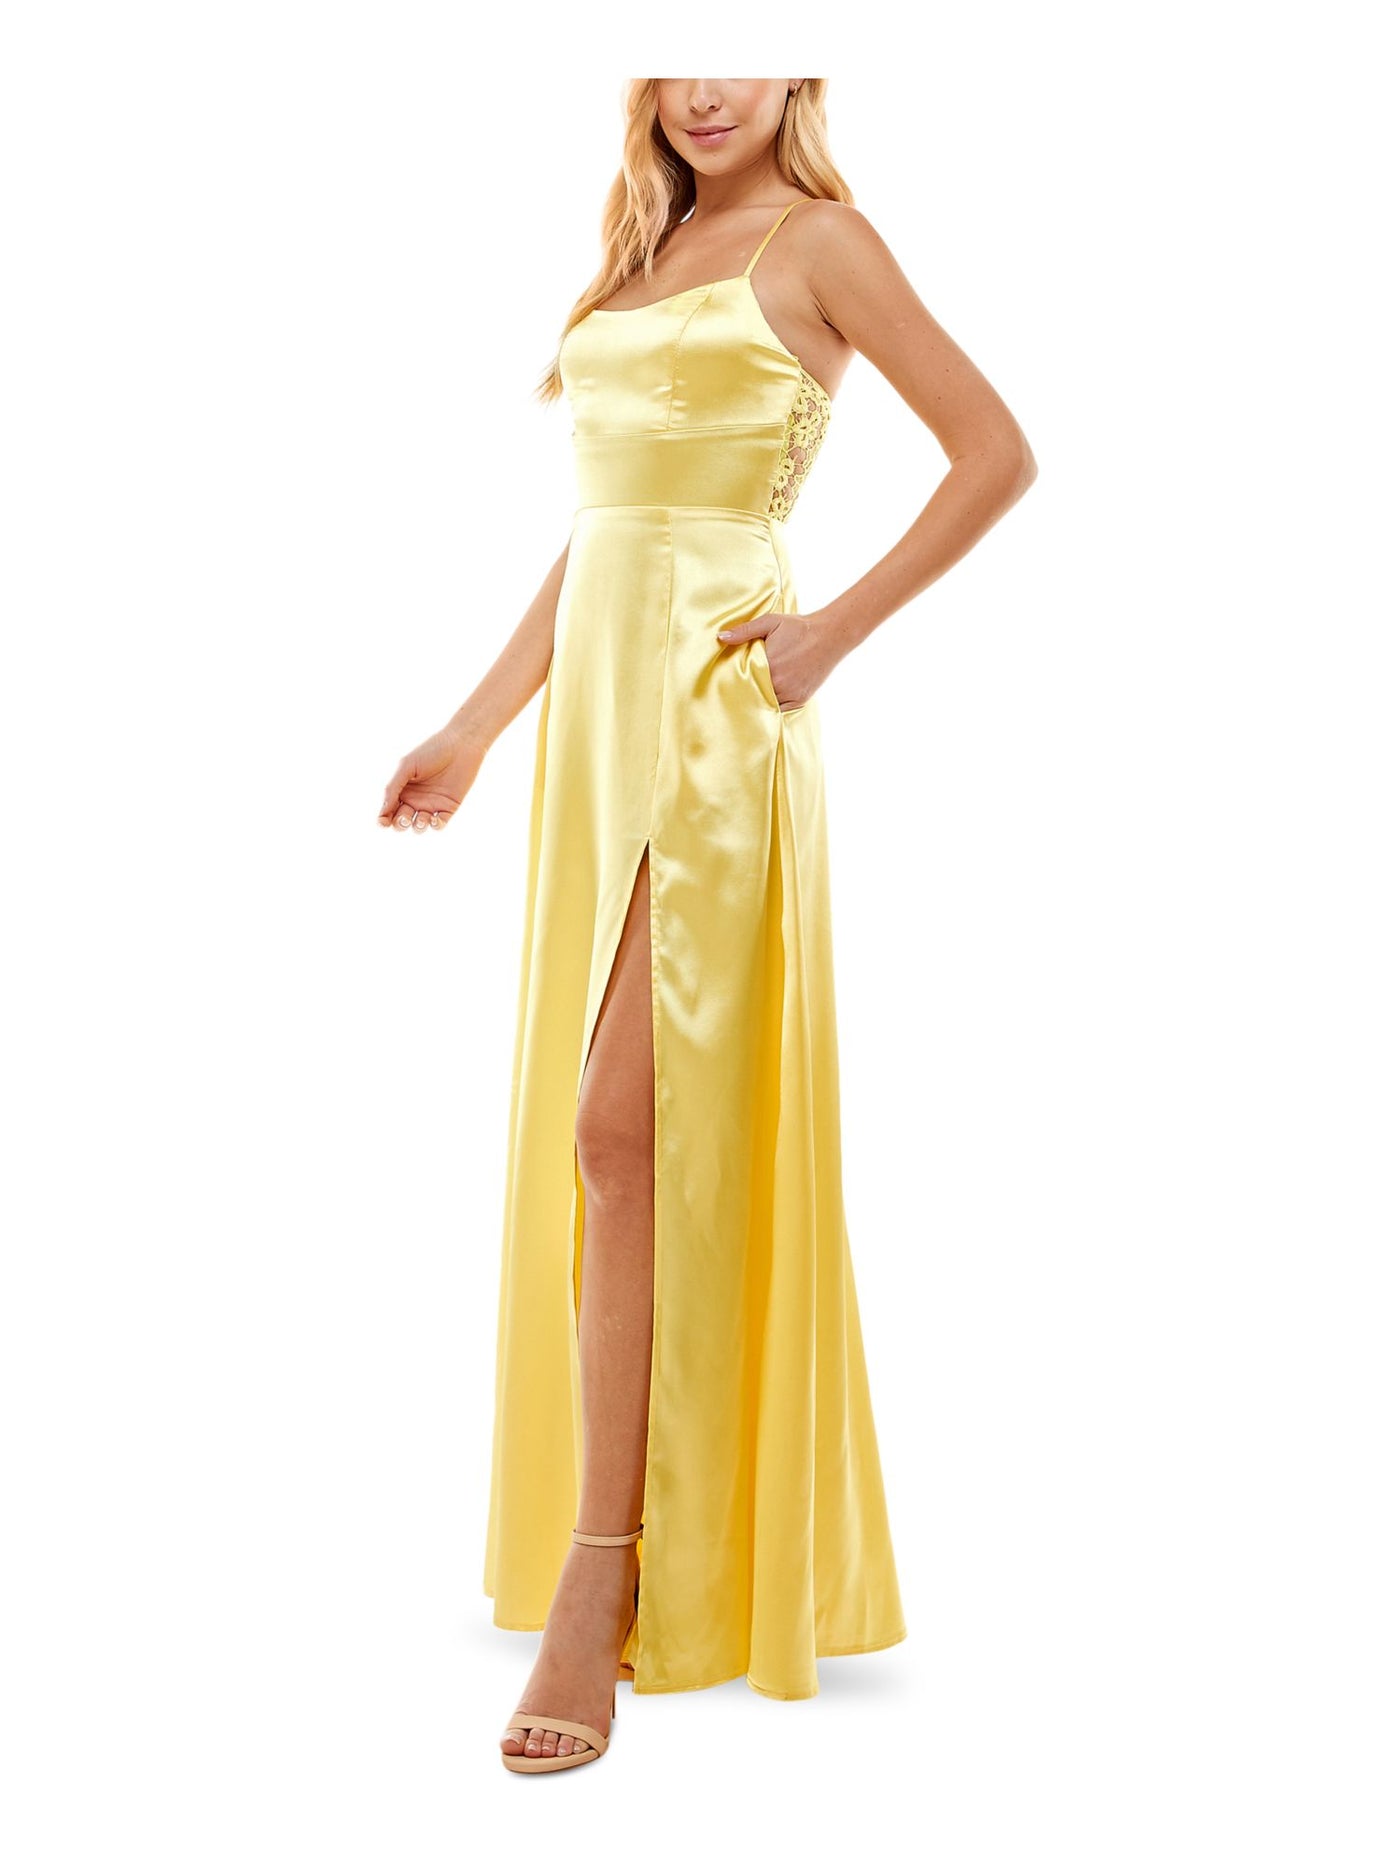 CITY STUDIO Womens Yellow Zippered Slitted Lined Adjustable Lace Back Sleeveless Square Neck Full-Length  Gown Prom Dress Juniors 1